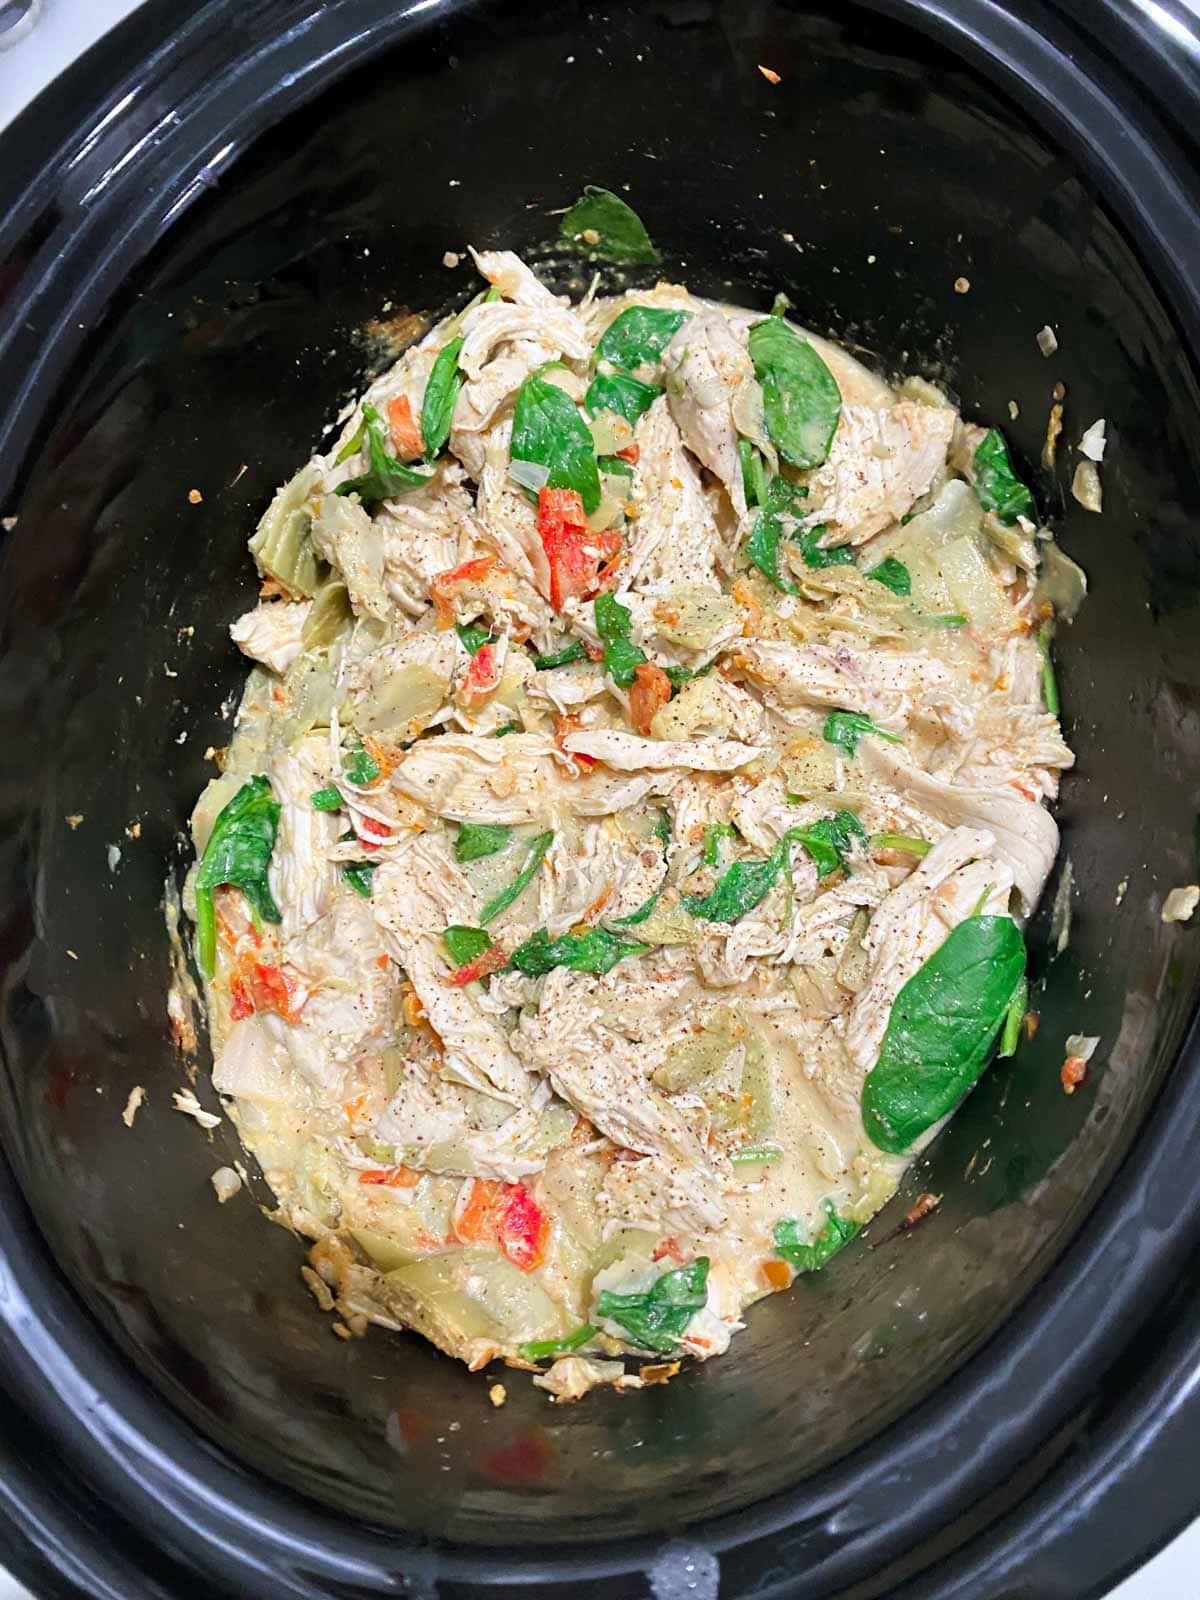 Shredded chicken and spinach in a Tuscan cream sauce.